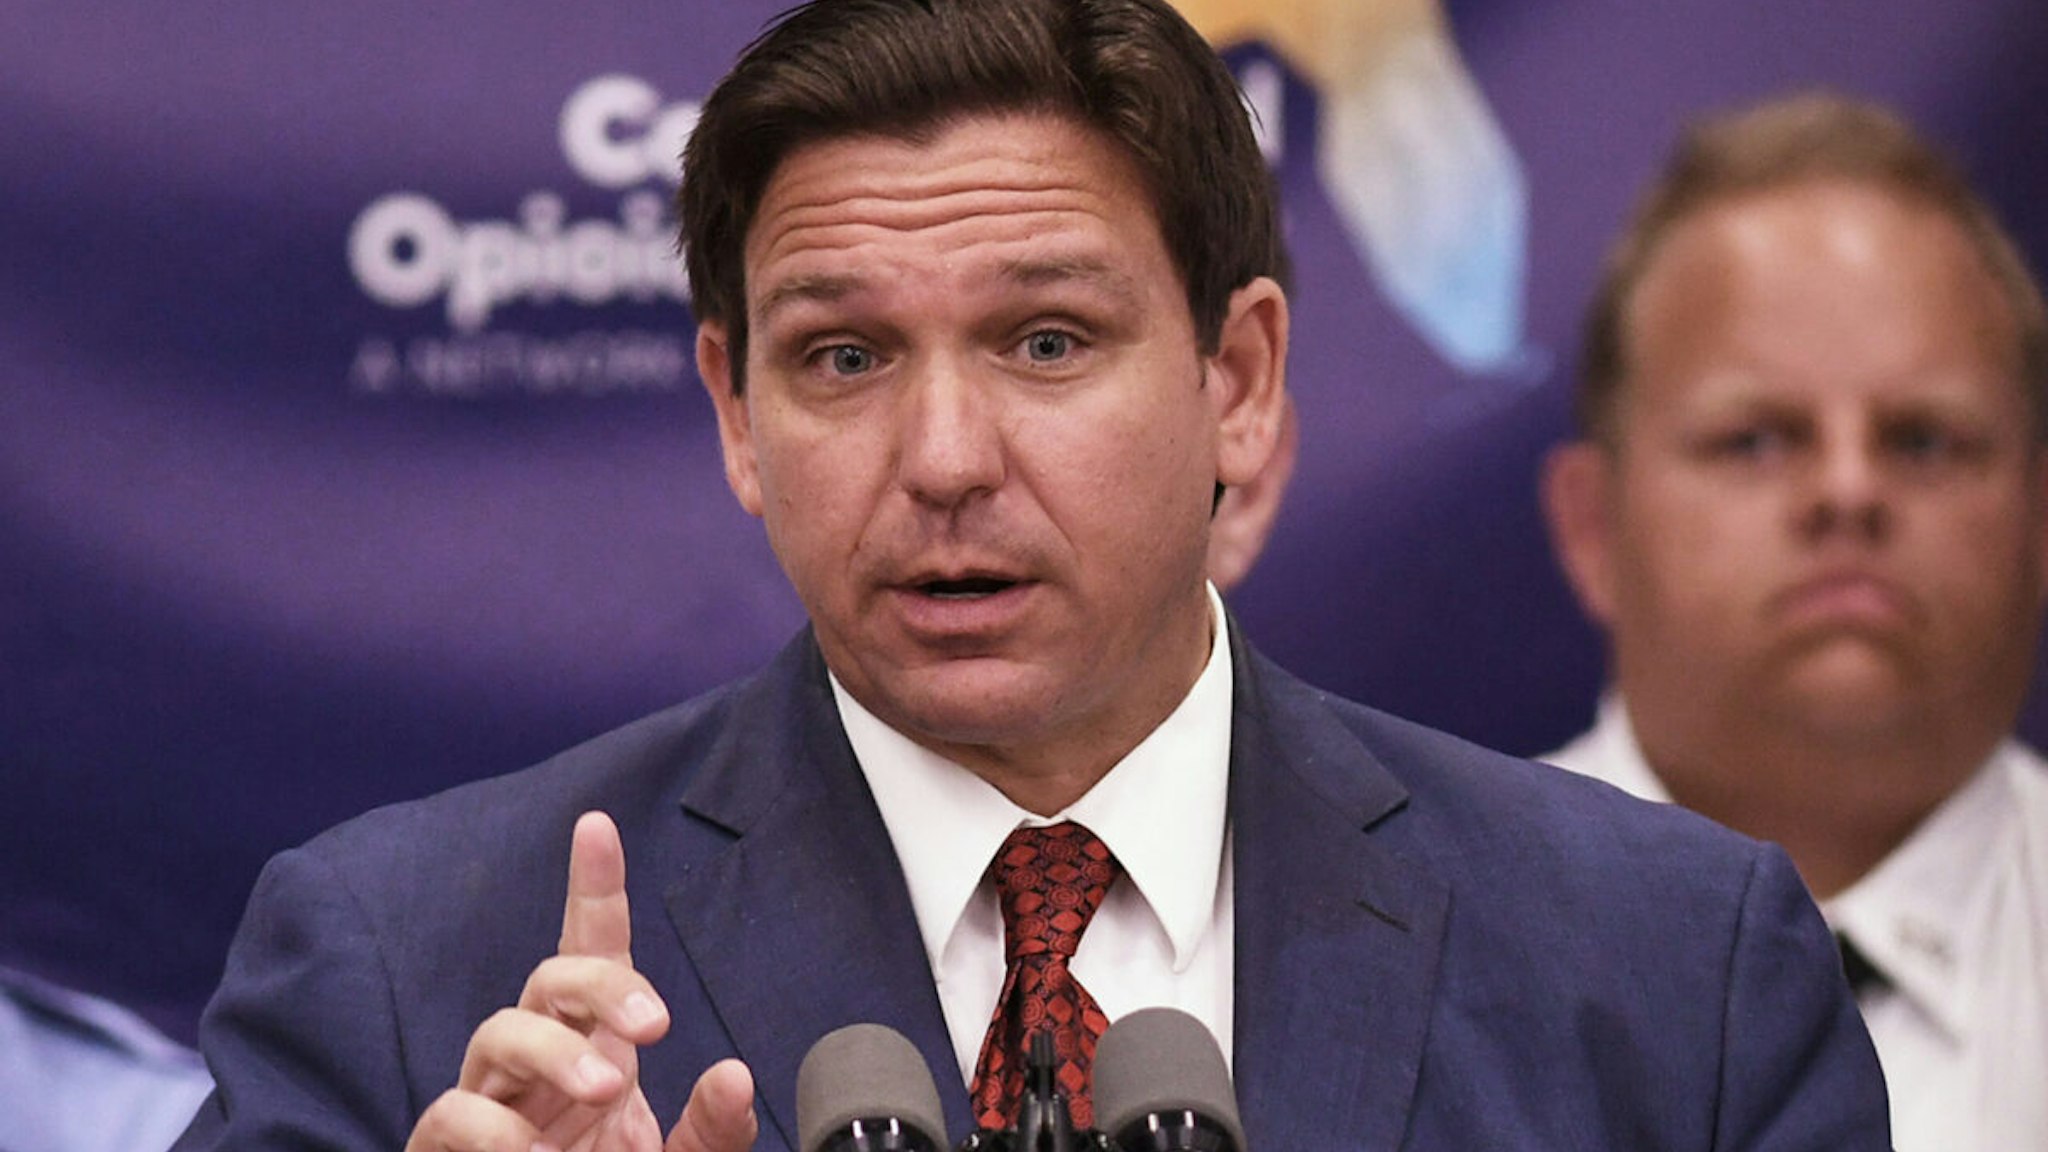 Florida Gov. Ron DeSantis speaks at a press conference to announce the expansion of a new, piloted substance abuse and recovery network to disrupt the opioid epidemic, at the Space Coast Health Foundation in Rockledge, Florida.